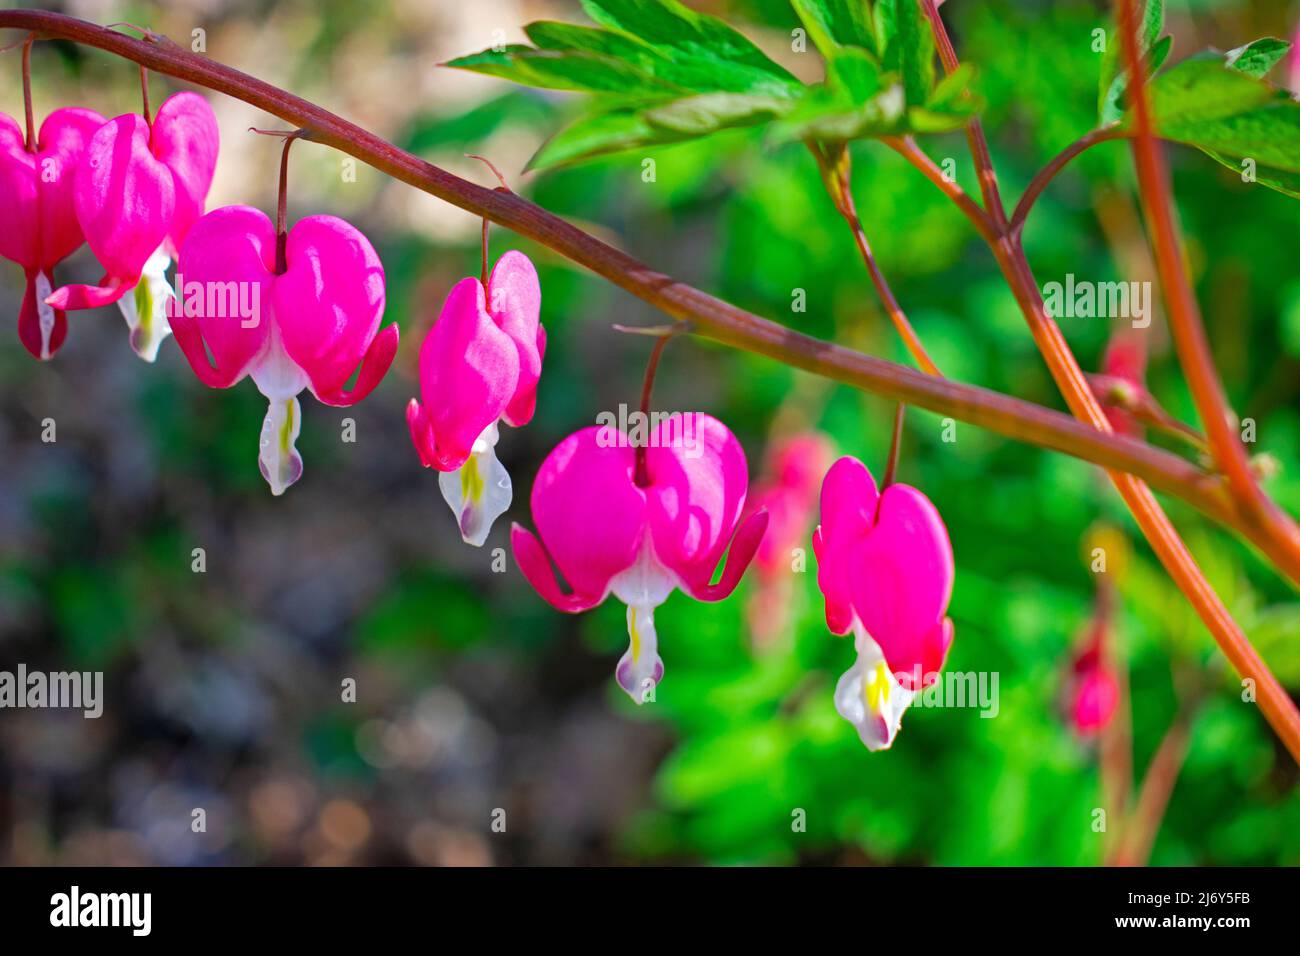 Pink bleeding hearts with white tails lined up on a plant stem against a blurred green and brown background -03 Stock Photo